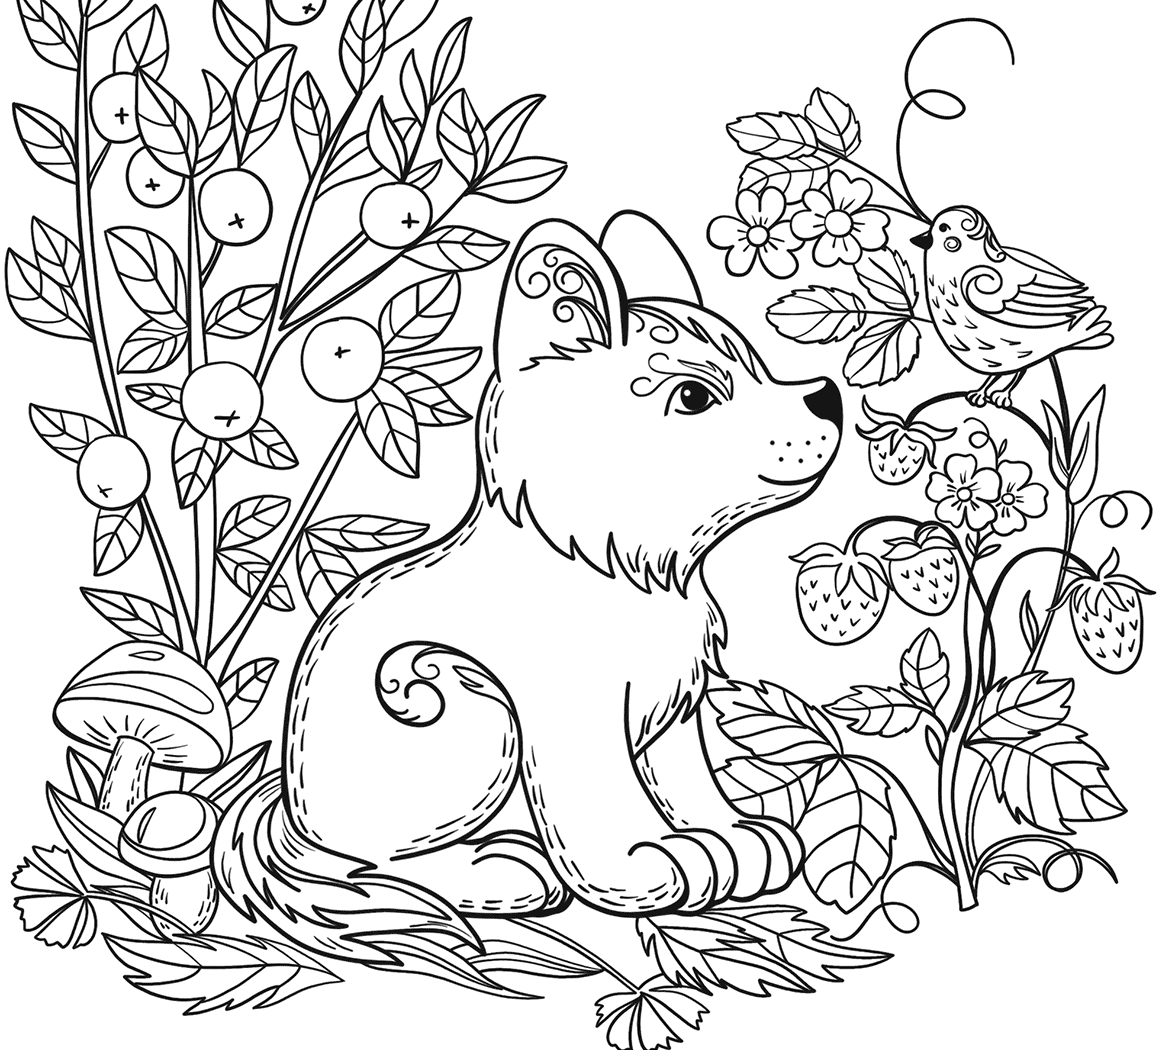 Free Wild Animal Coloring Pages at GetColoringscom Free